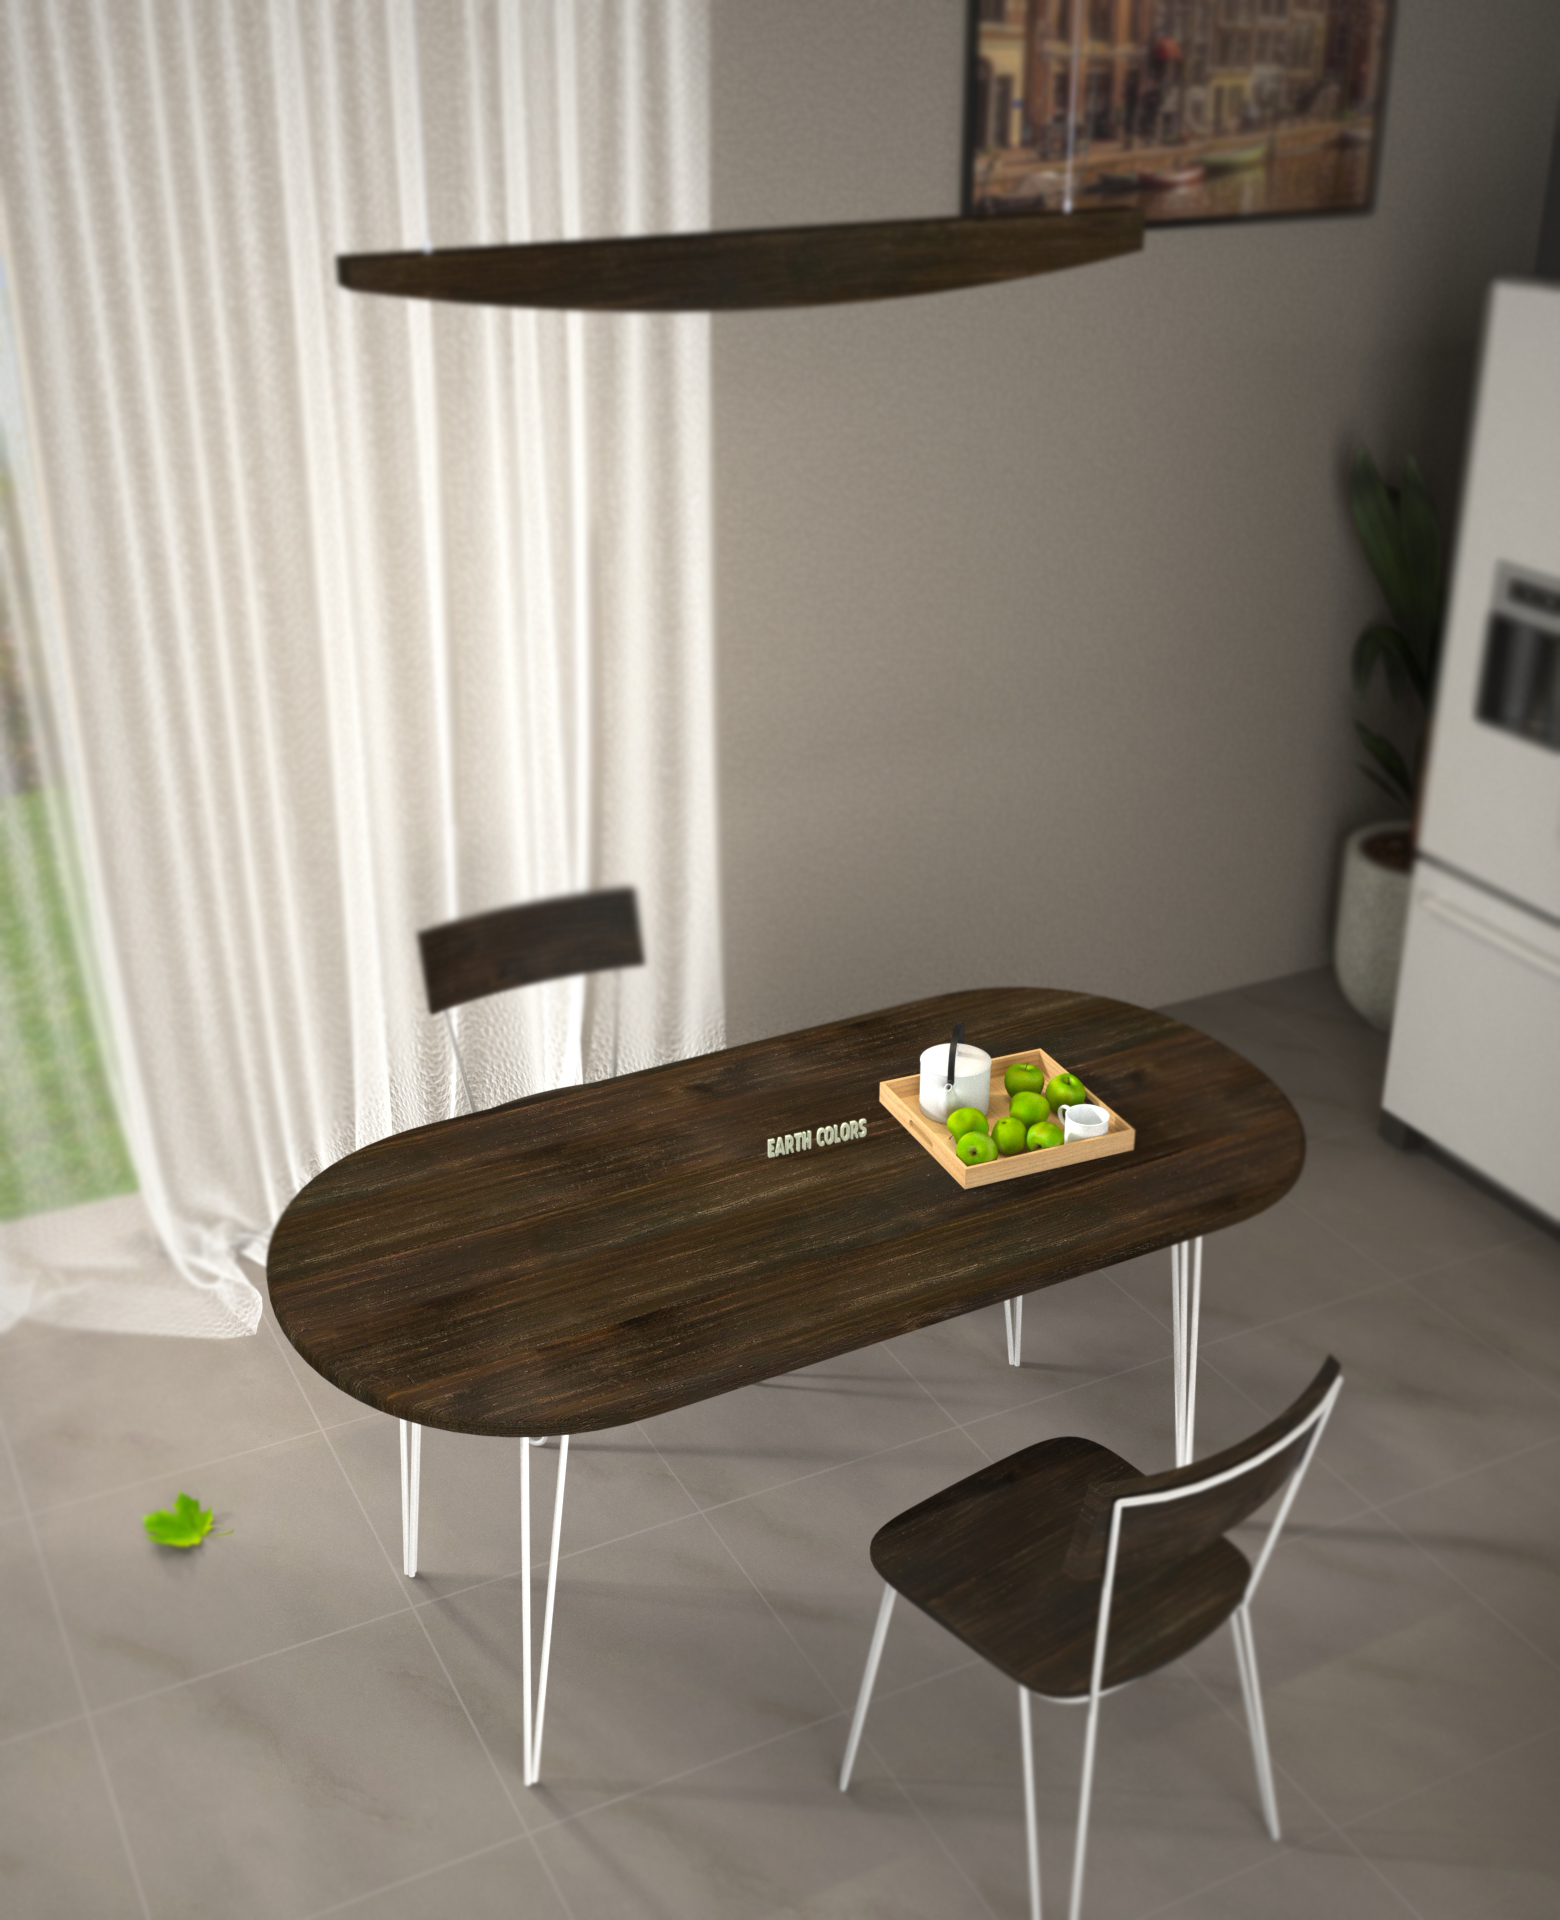 Solid wood dining tables uk